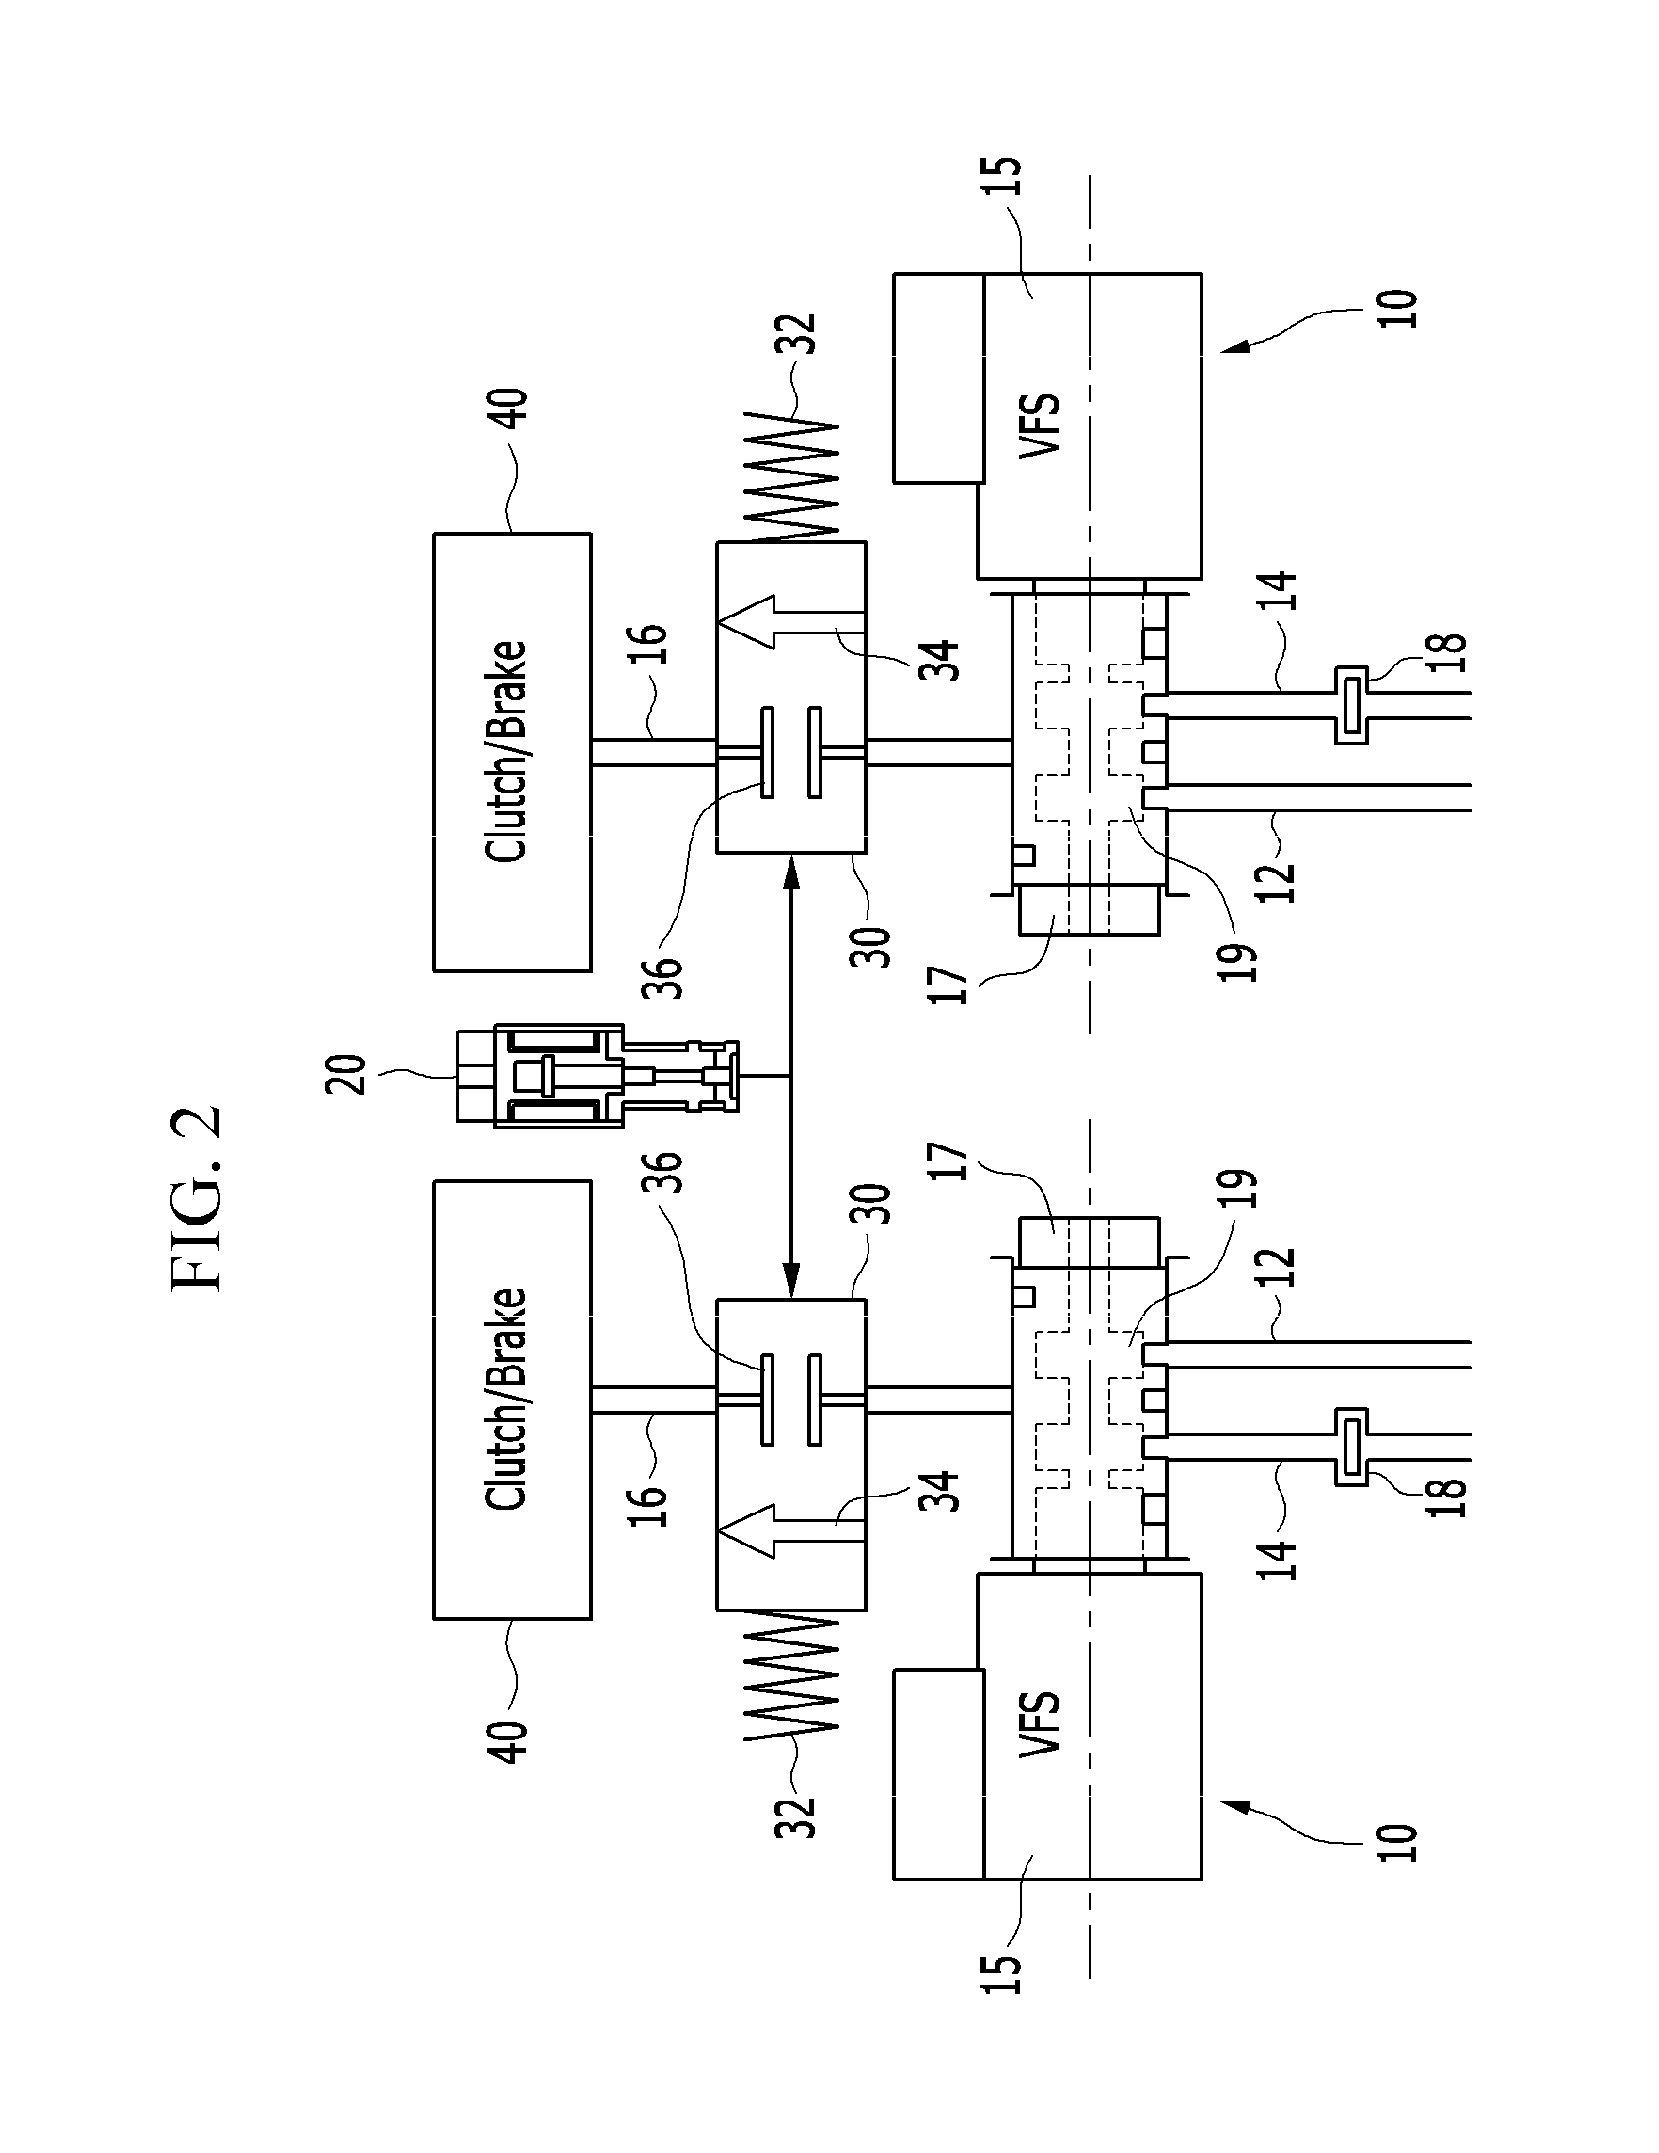 Hydraulic circuit for automatic transmission